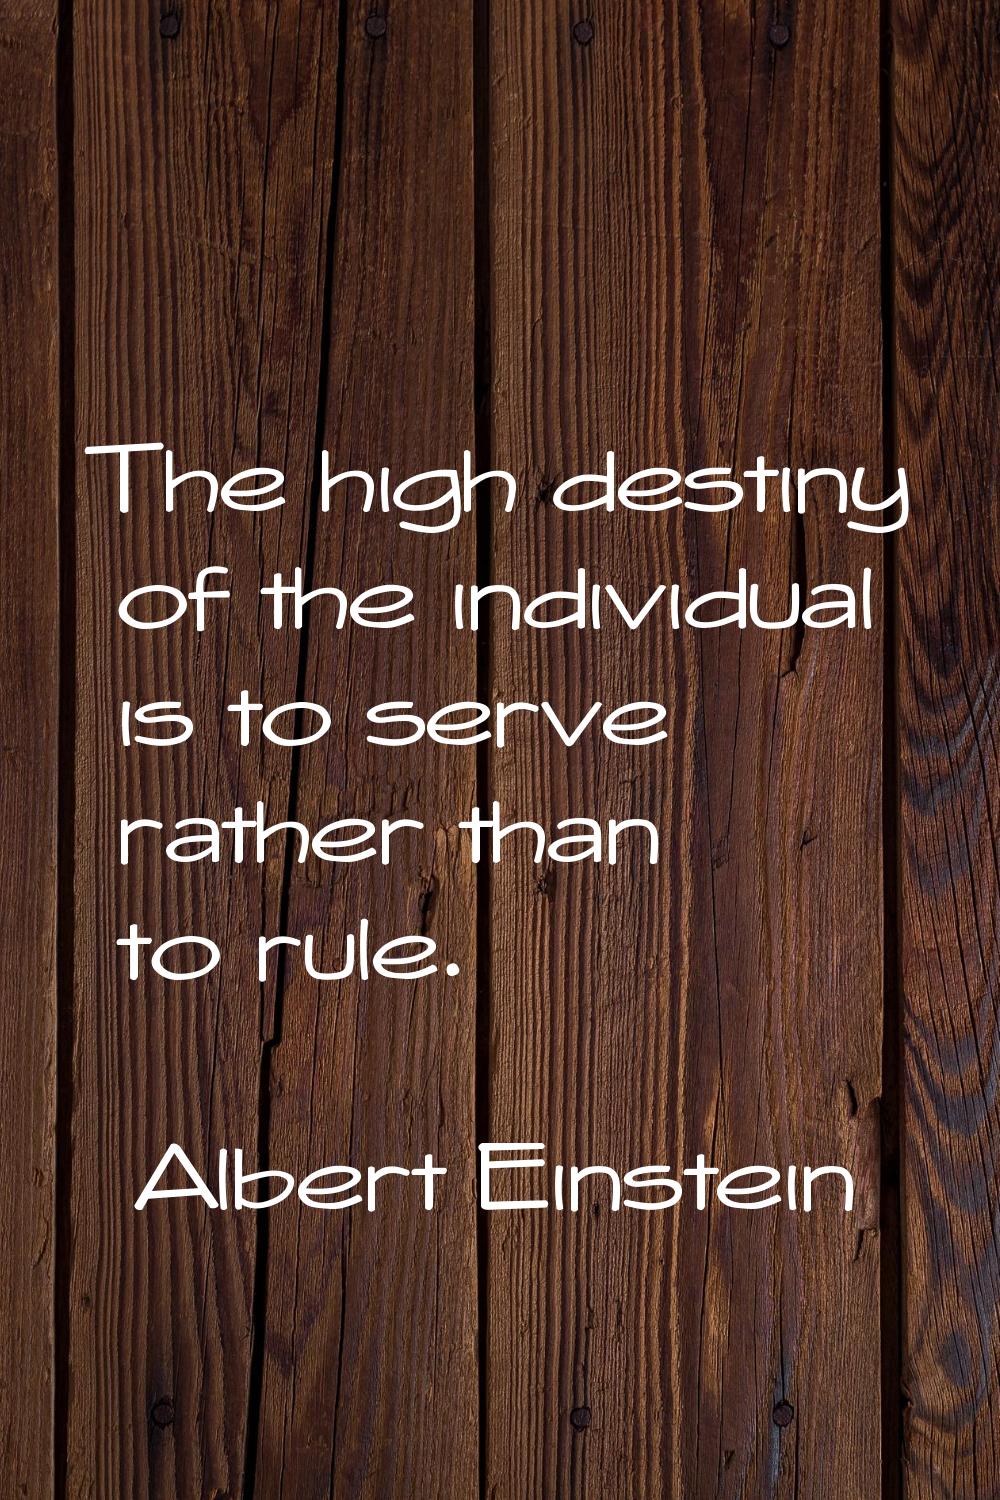 The high destiny of the individual is to serve rather than to rule.